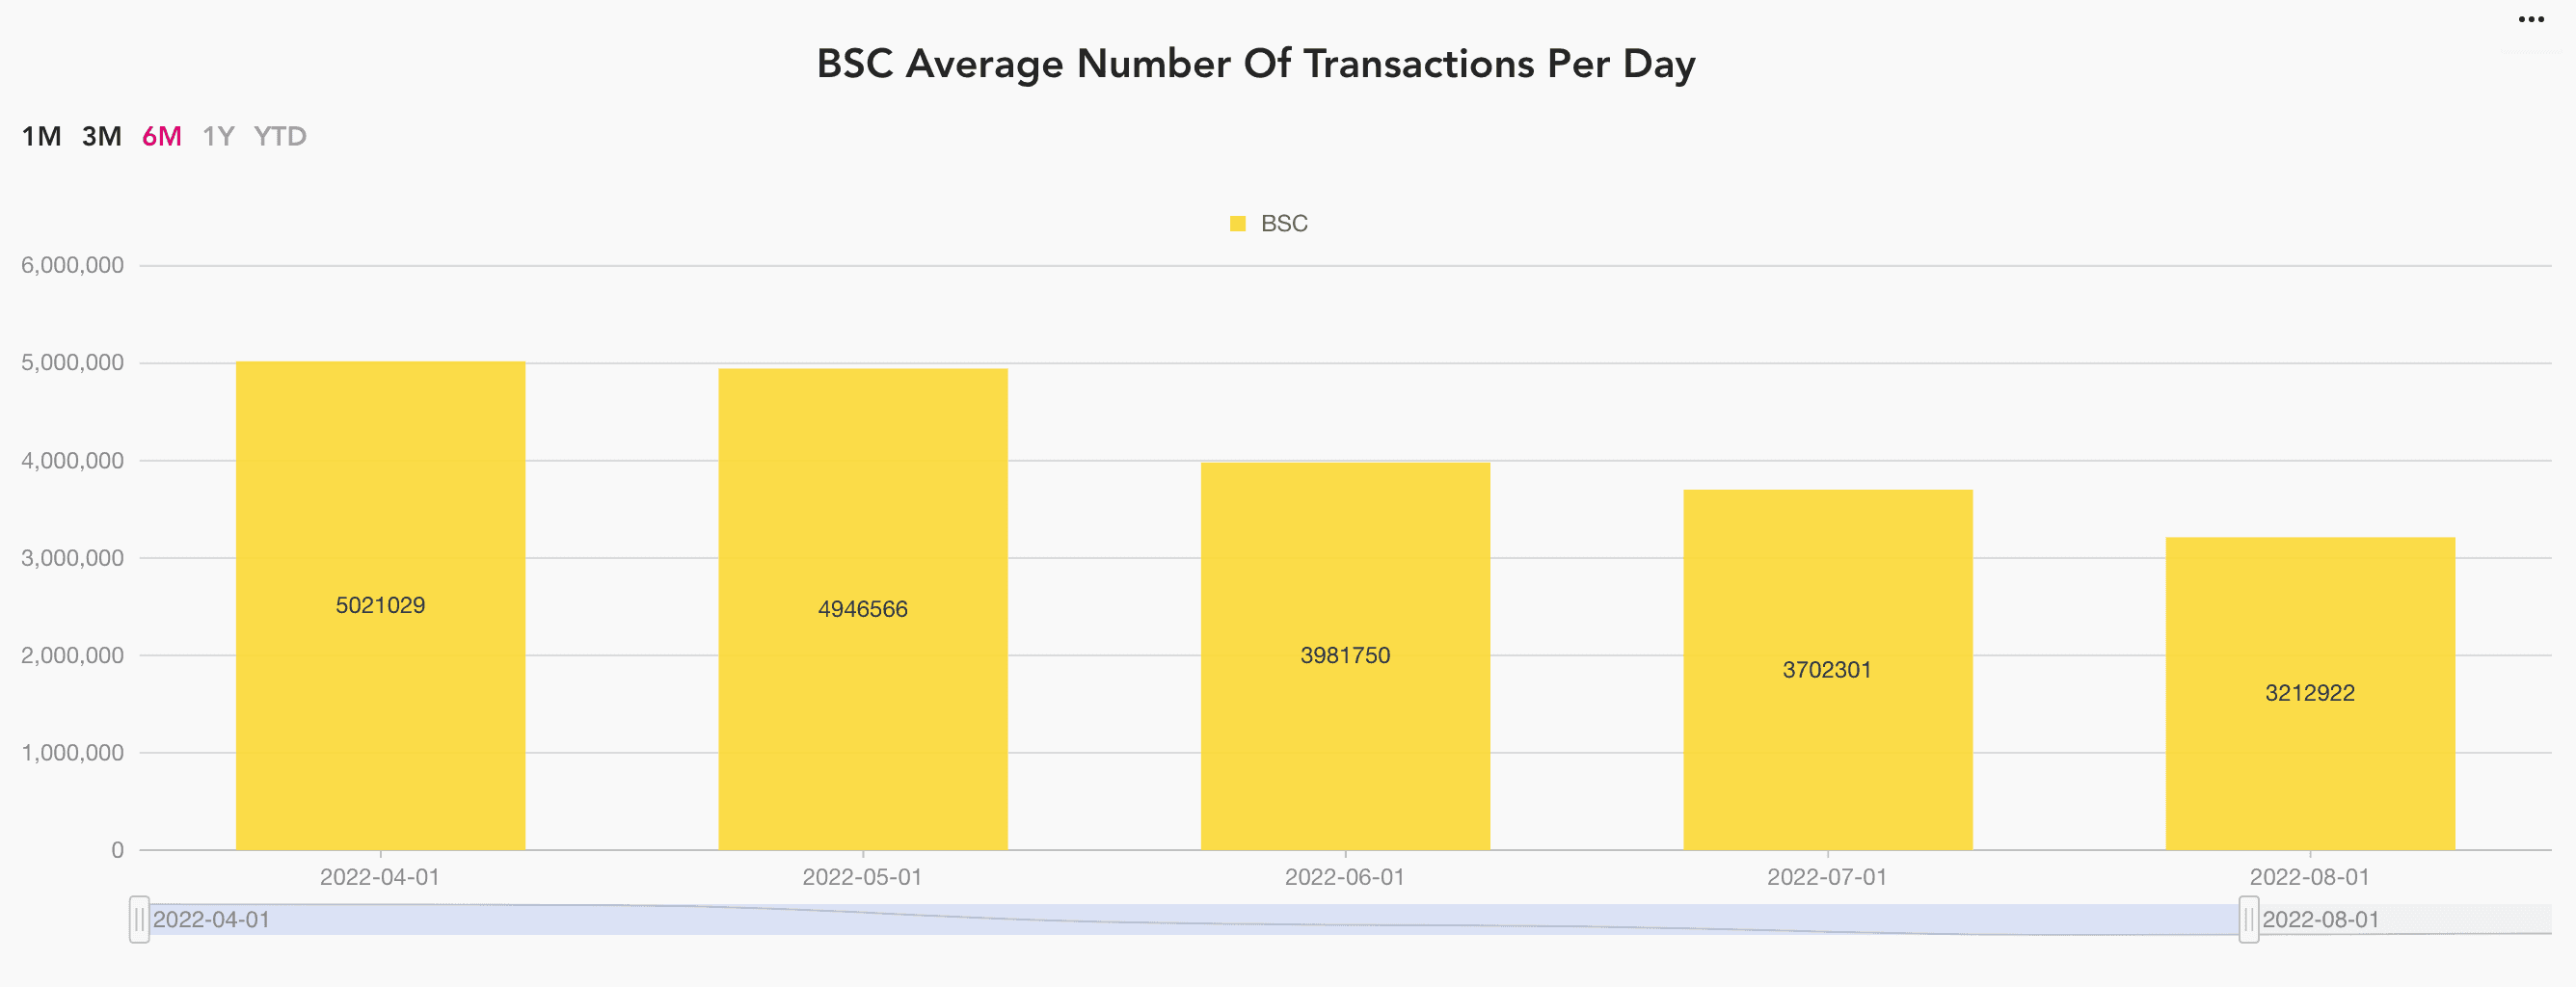 BSC average number of transactions per day 